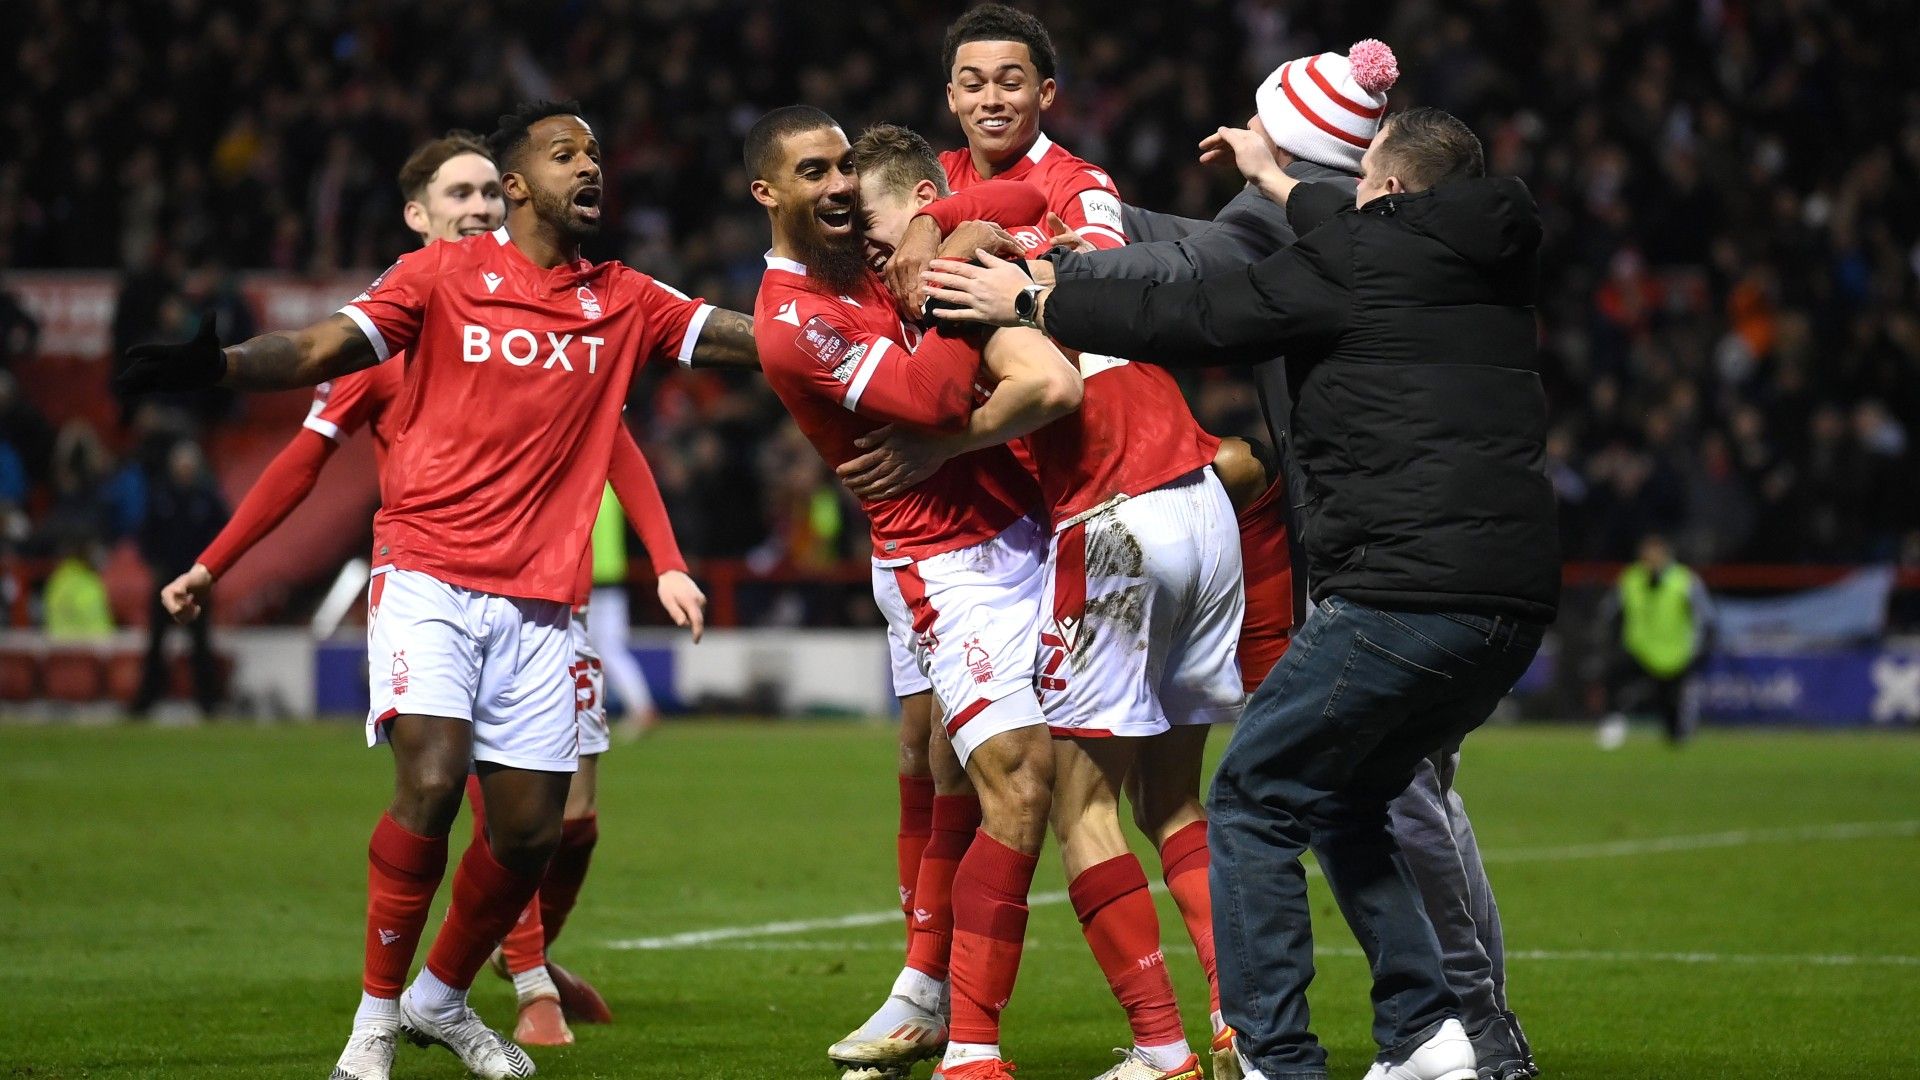 Arsenal loses to second-tier Nottingham Forest in FA Cup shock